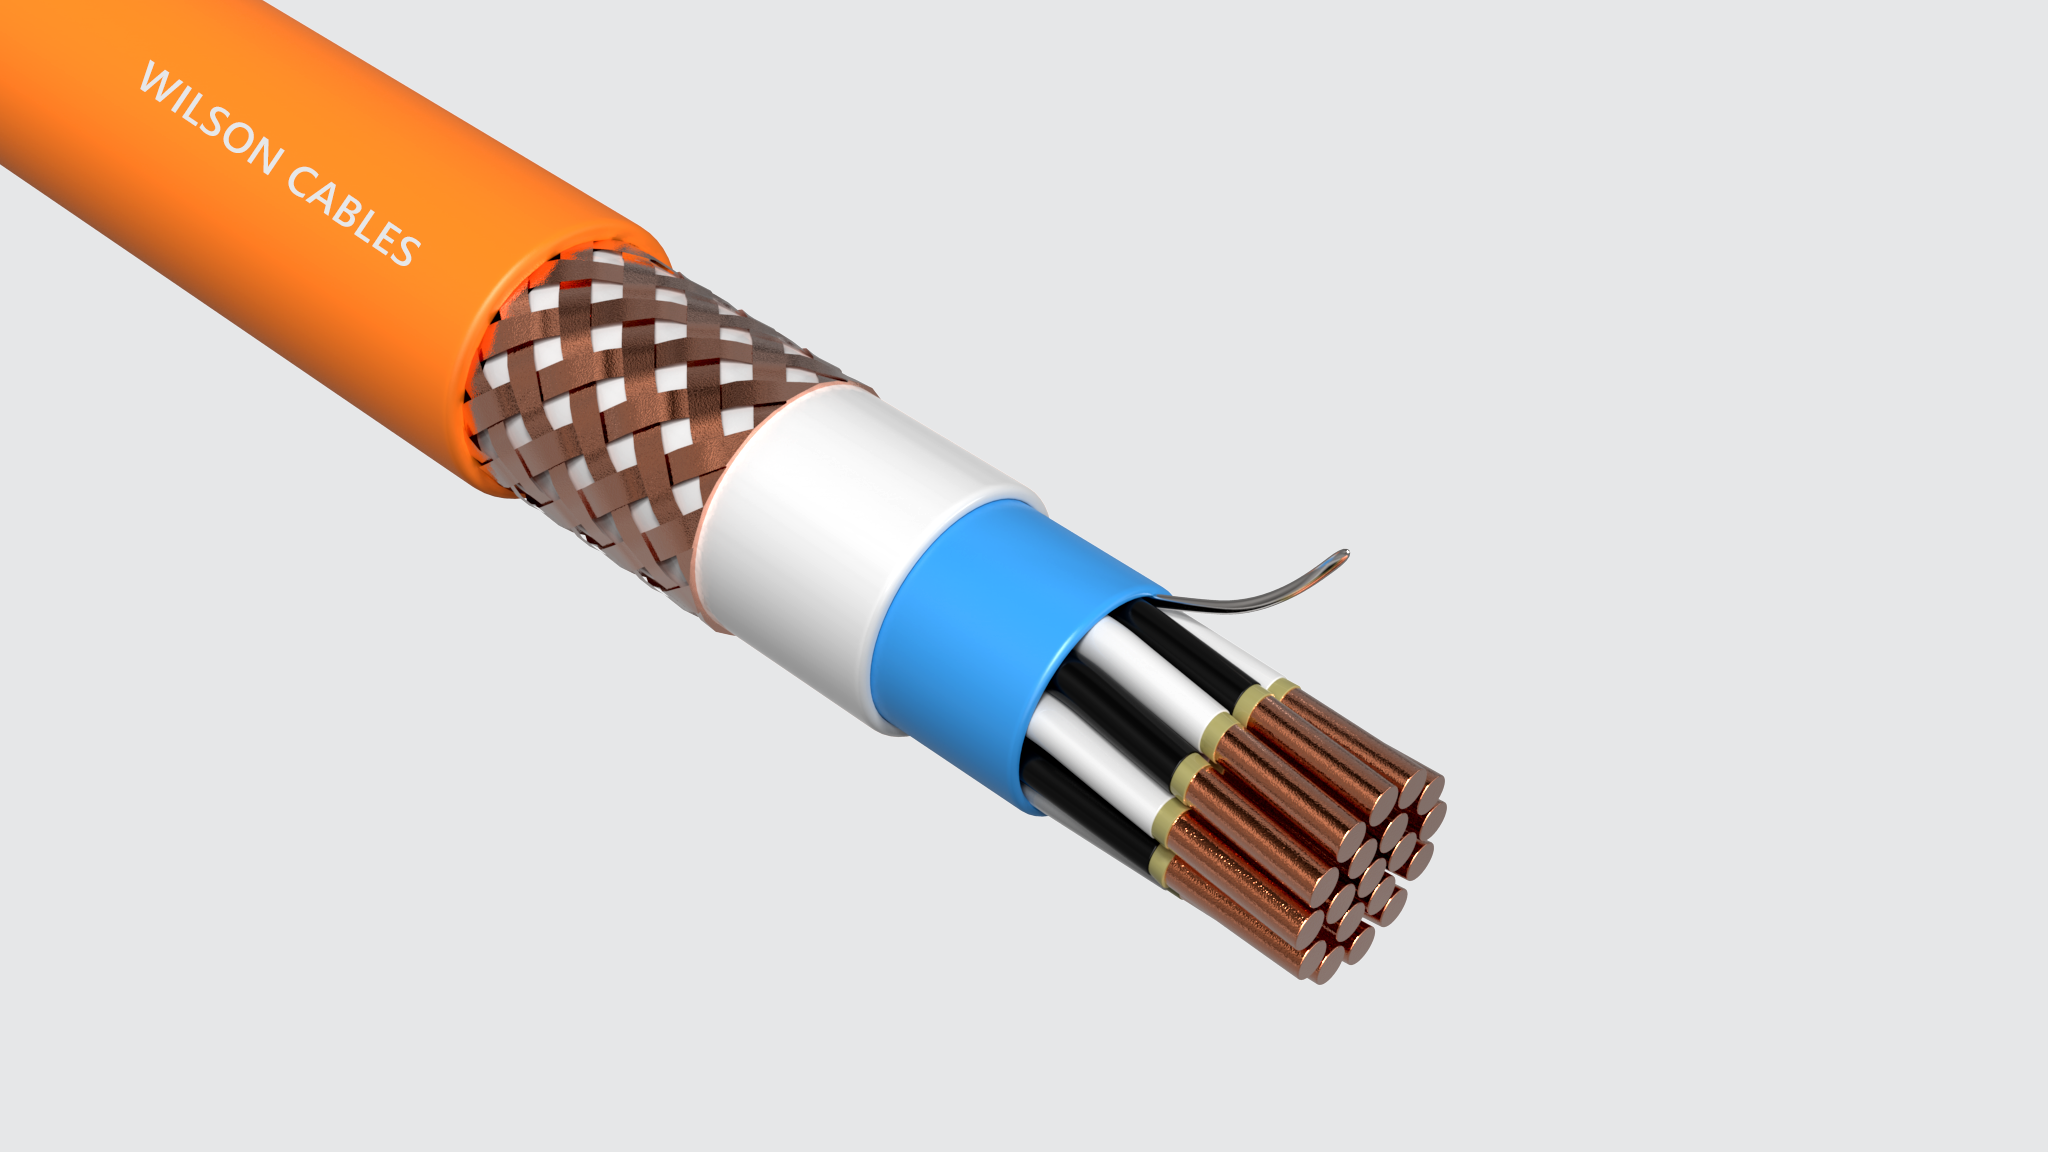 FRIC-200Q-M (SST) / FRIC-200C-M (SST) Fire Resistant Shipboard Braided Instrumentation Cables